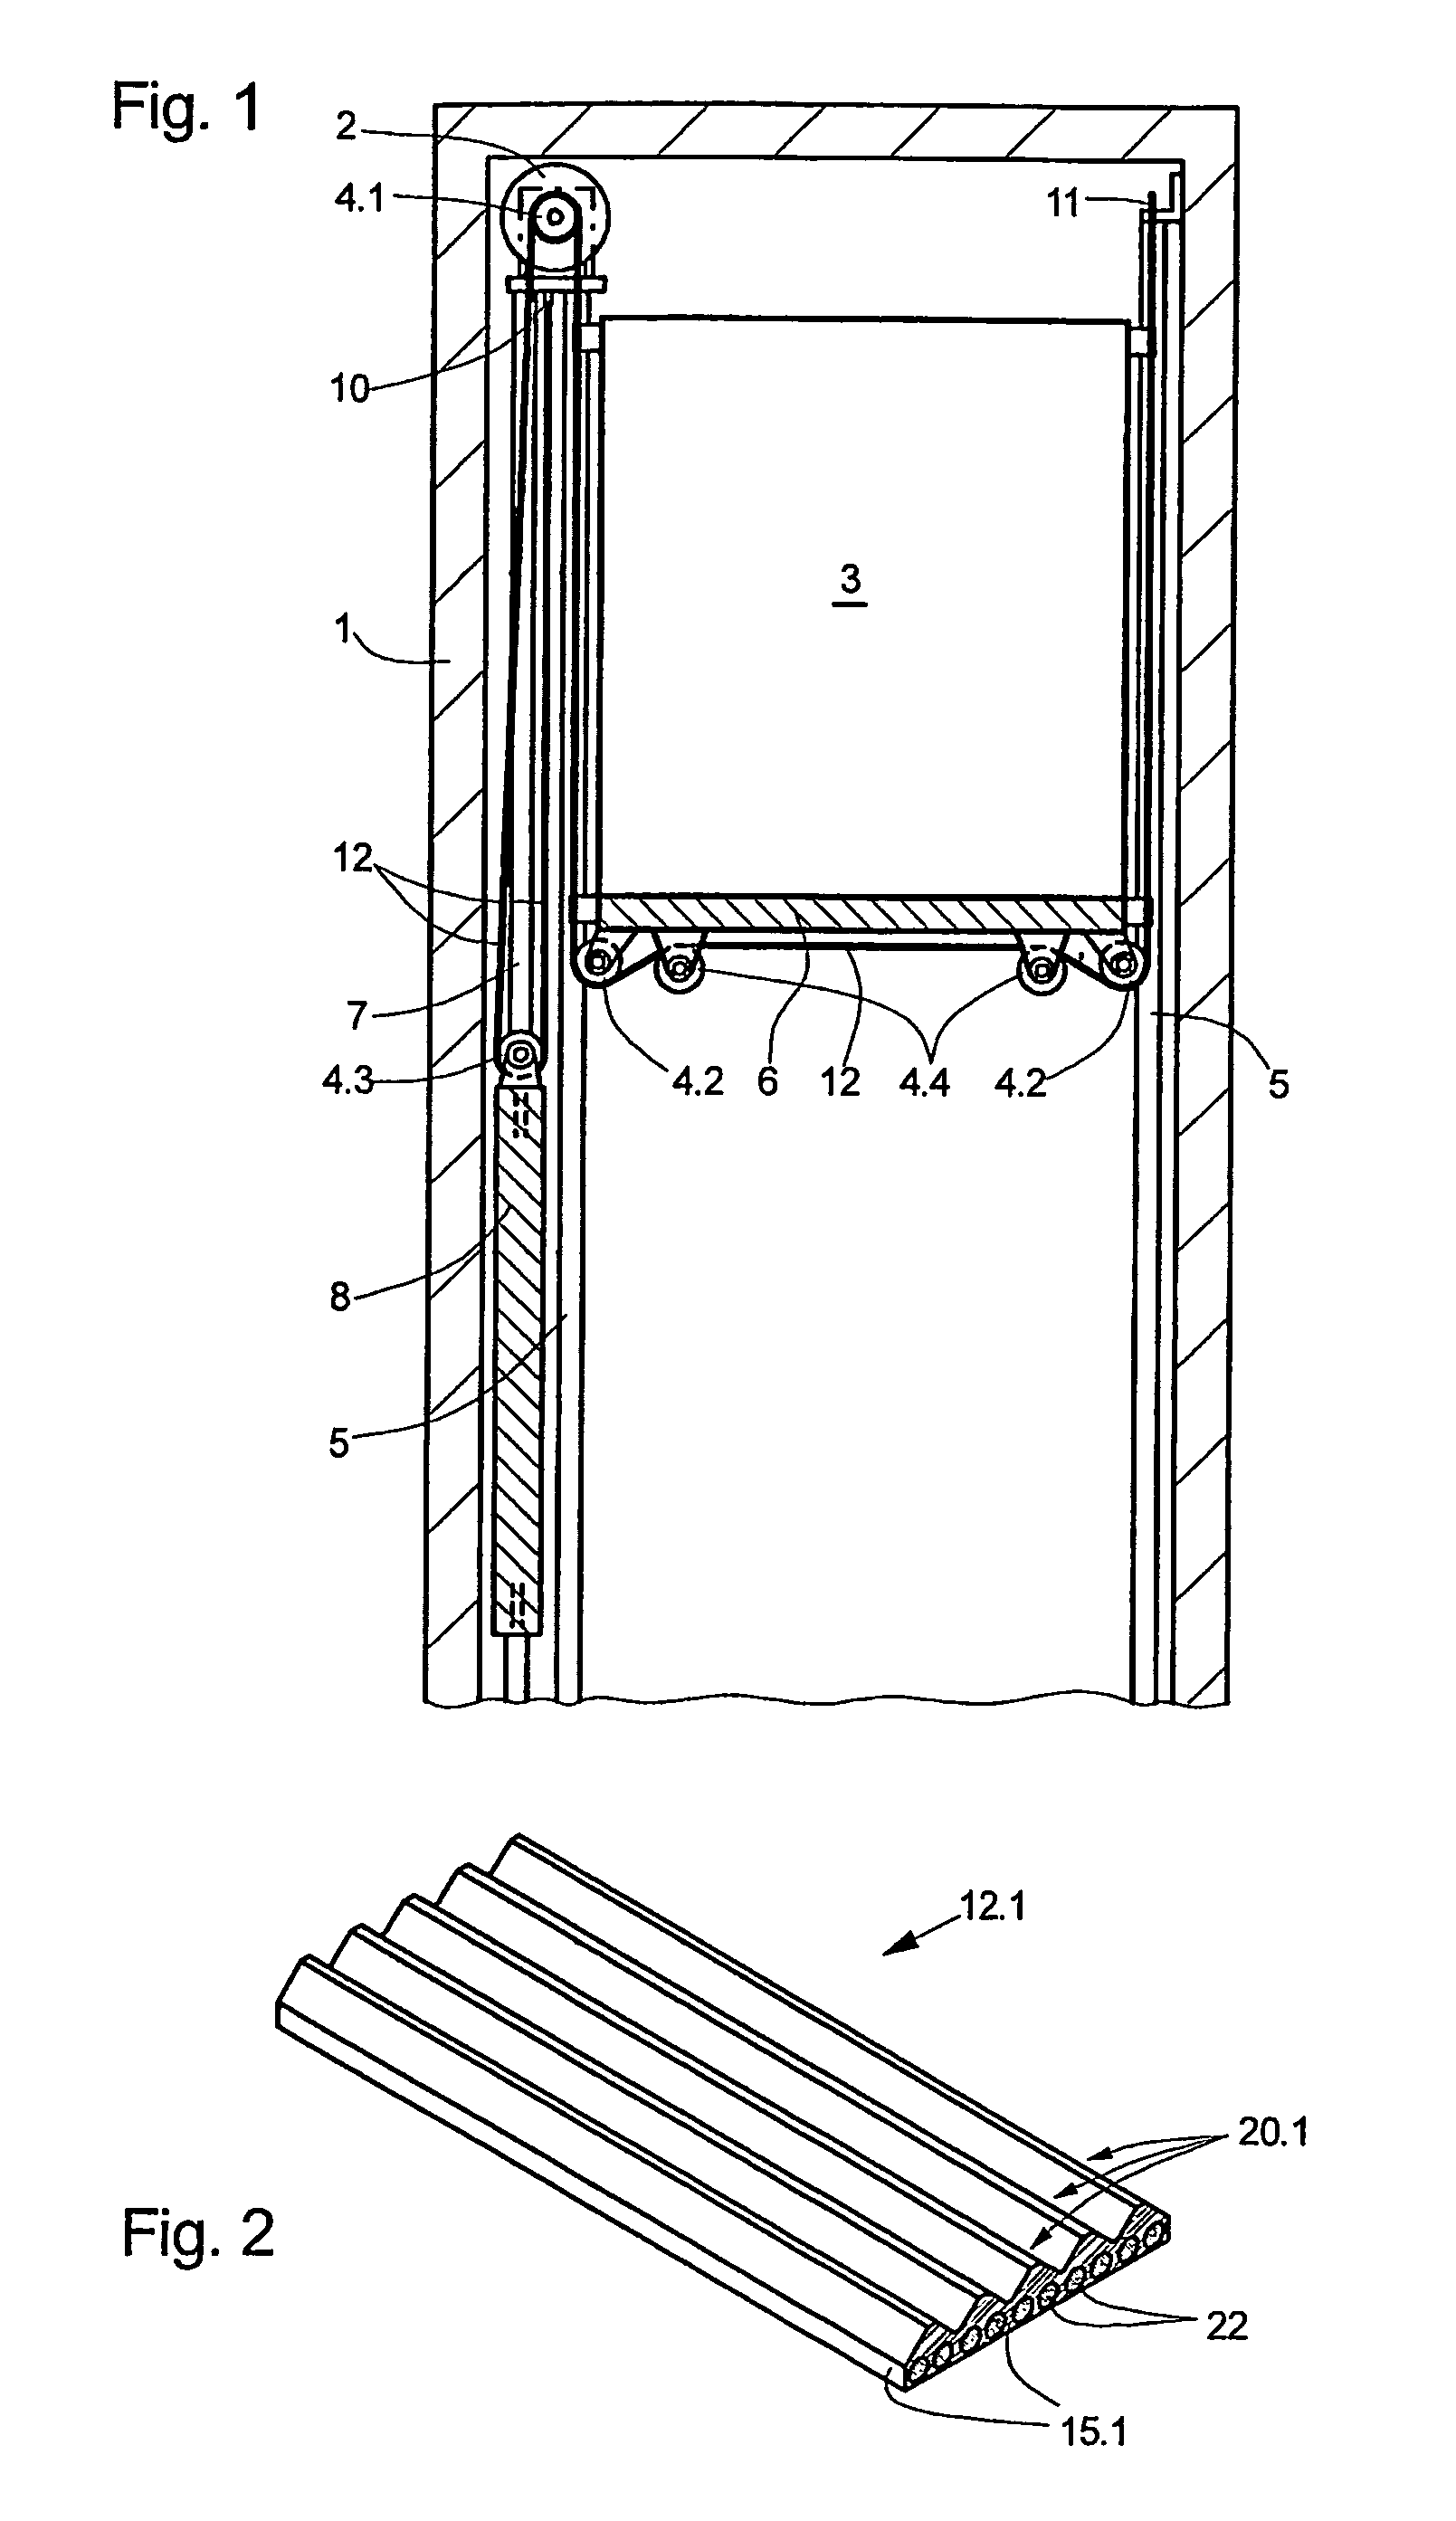 Elevator system having a flat belt with wedge-shaped ribs